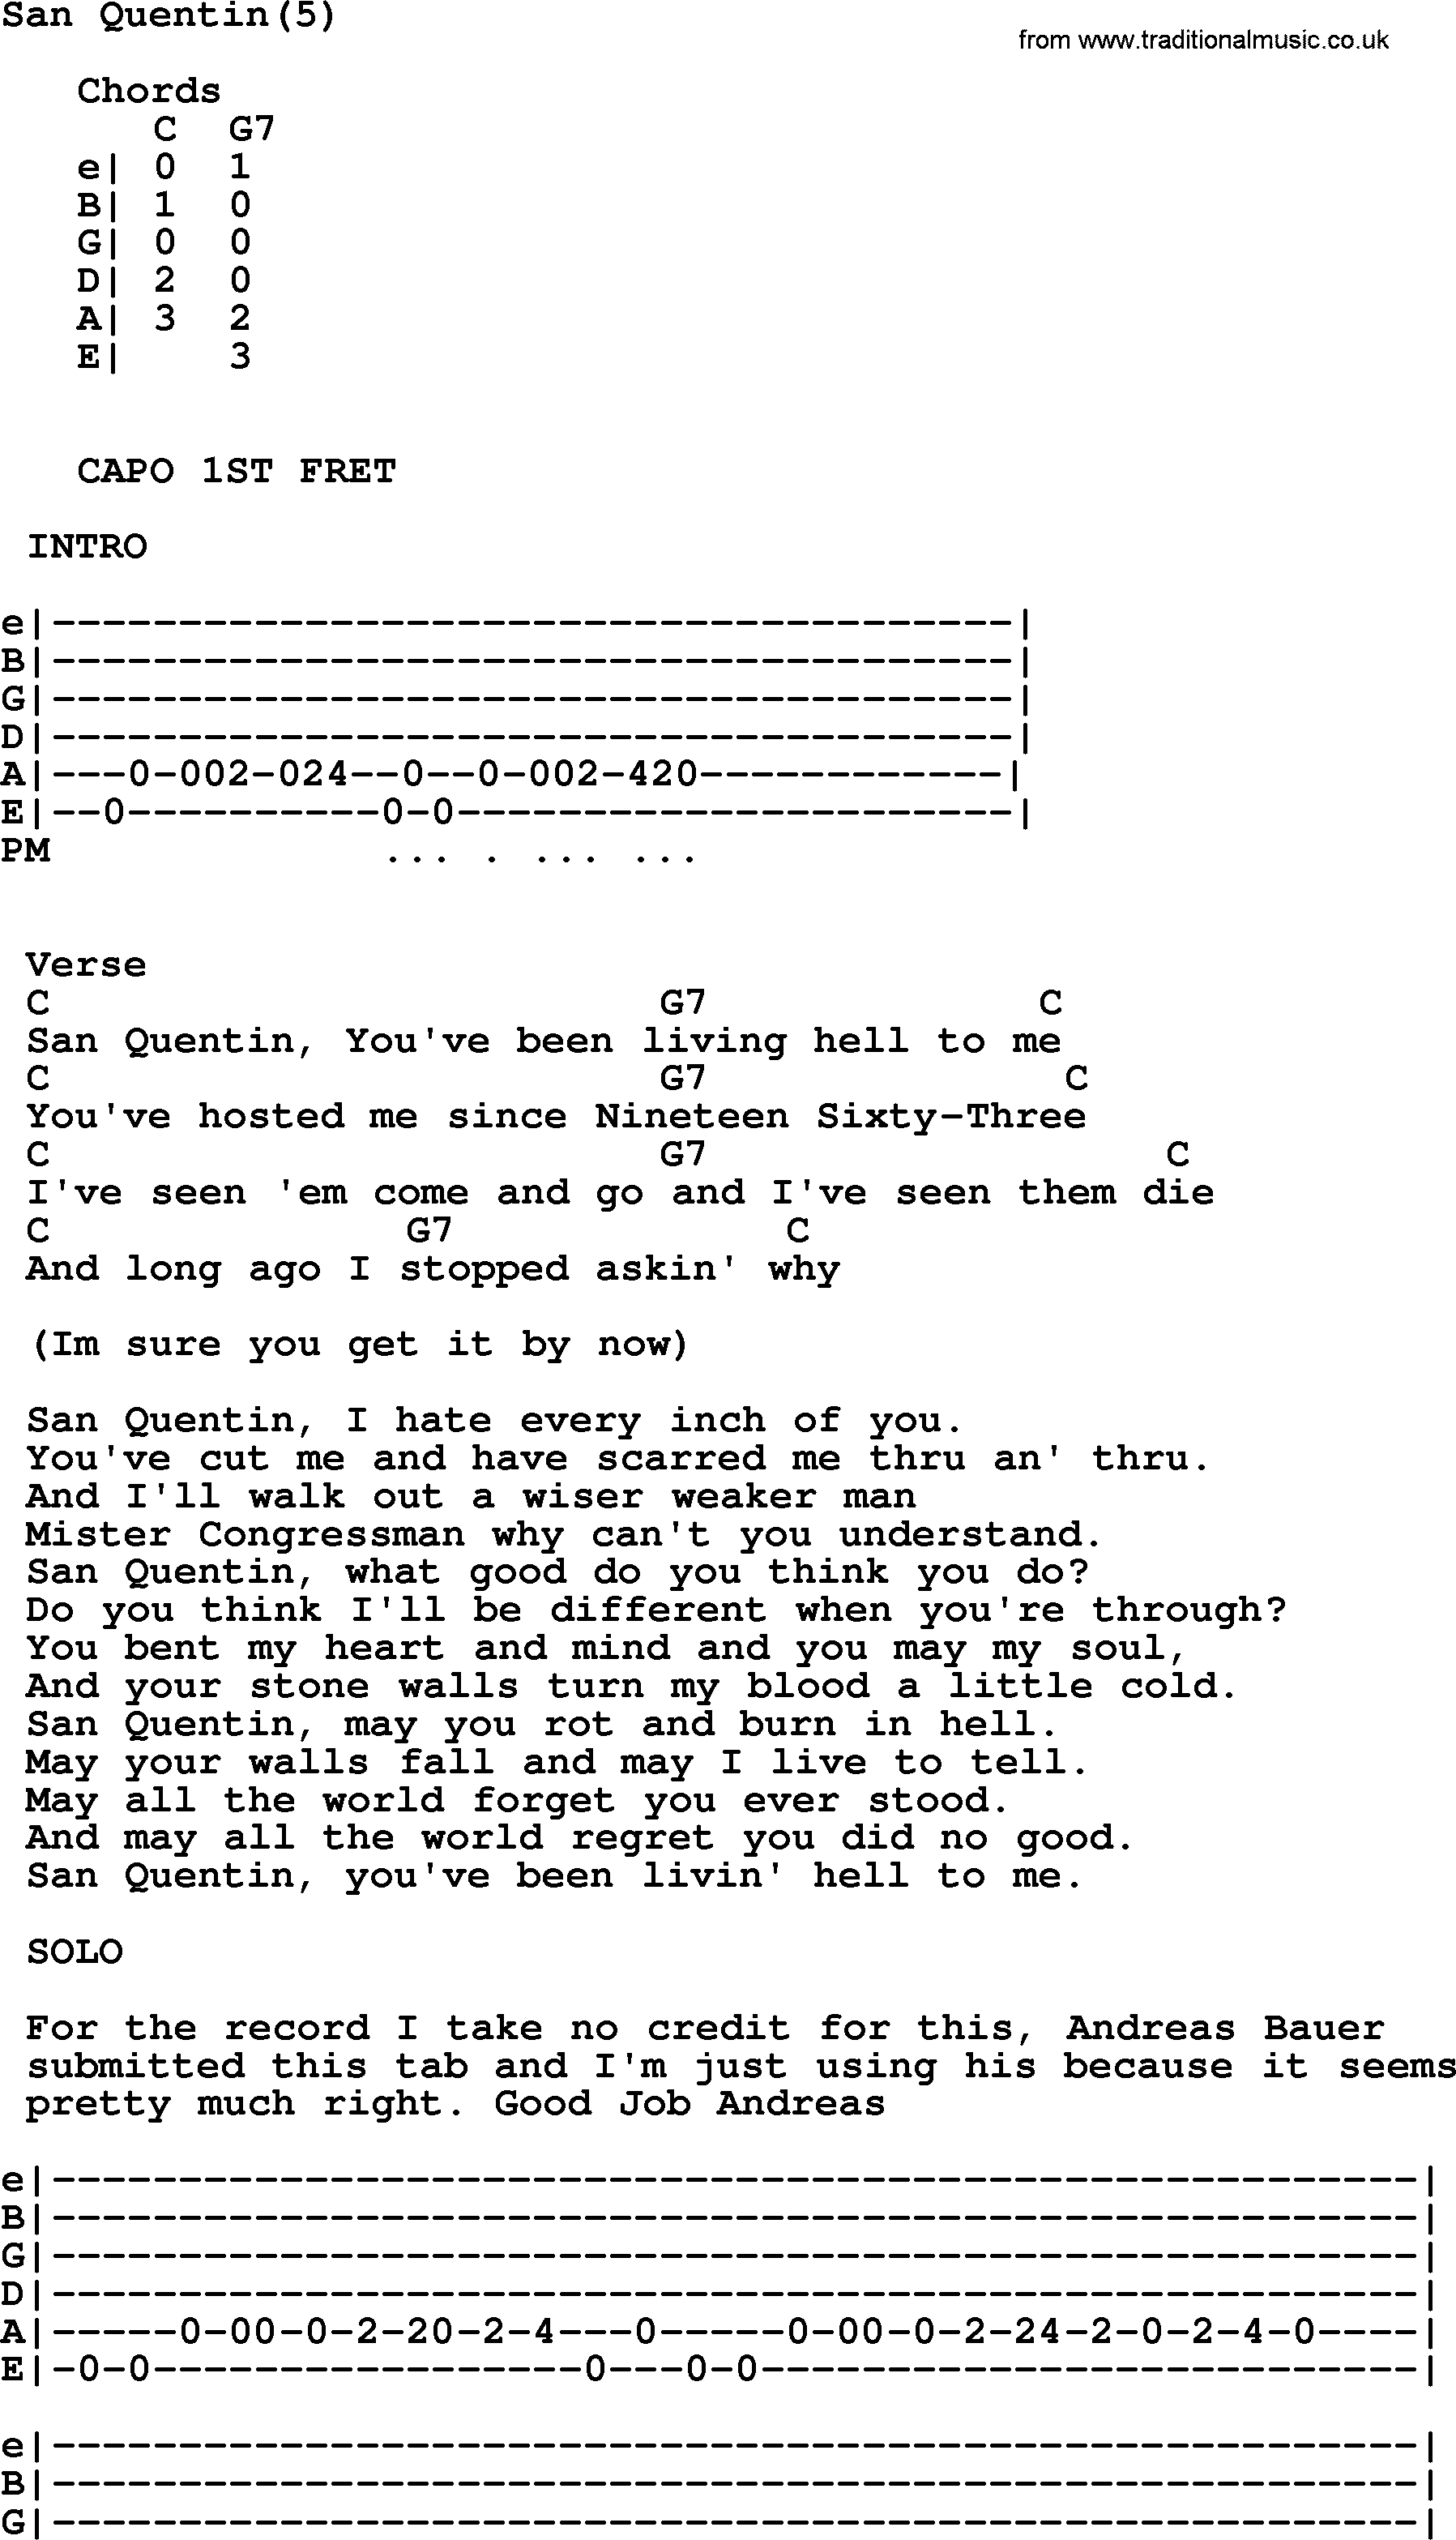 Johnny Cash song San Quentin(5), lyrics and chords